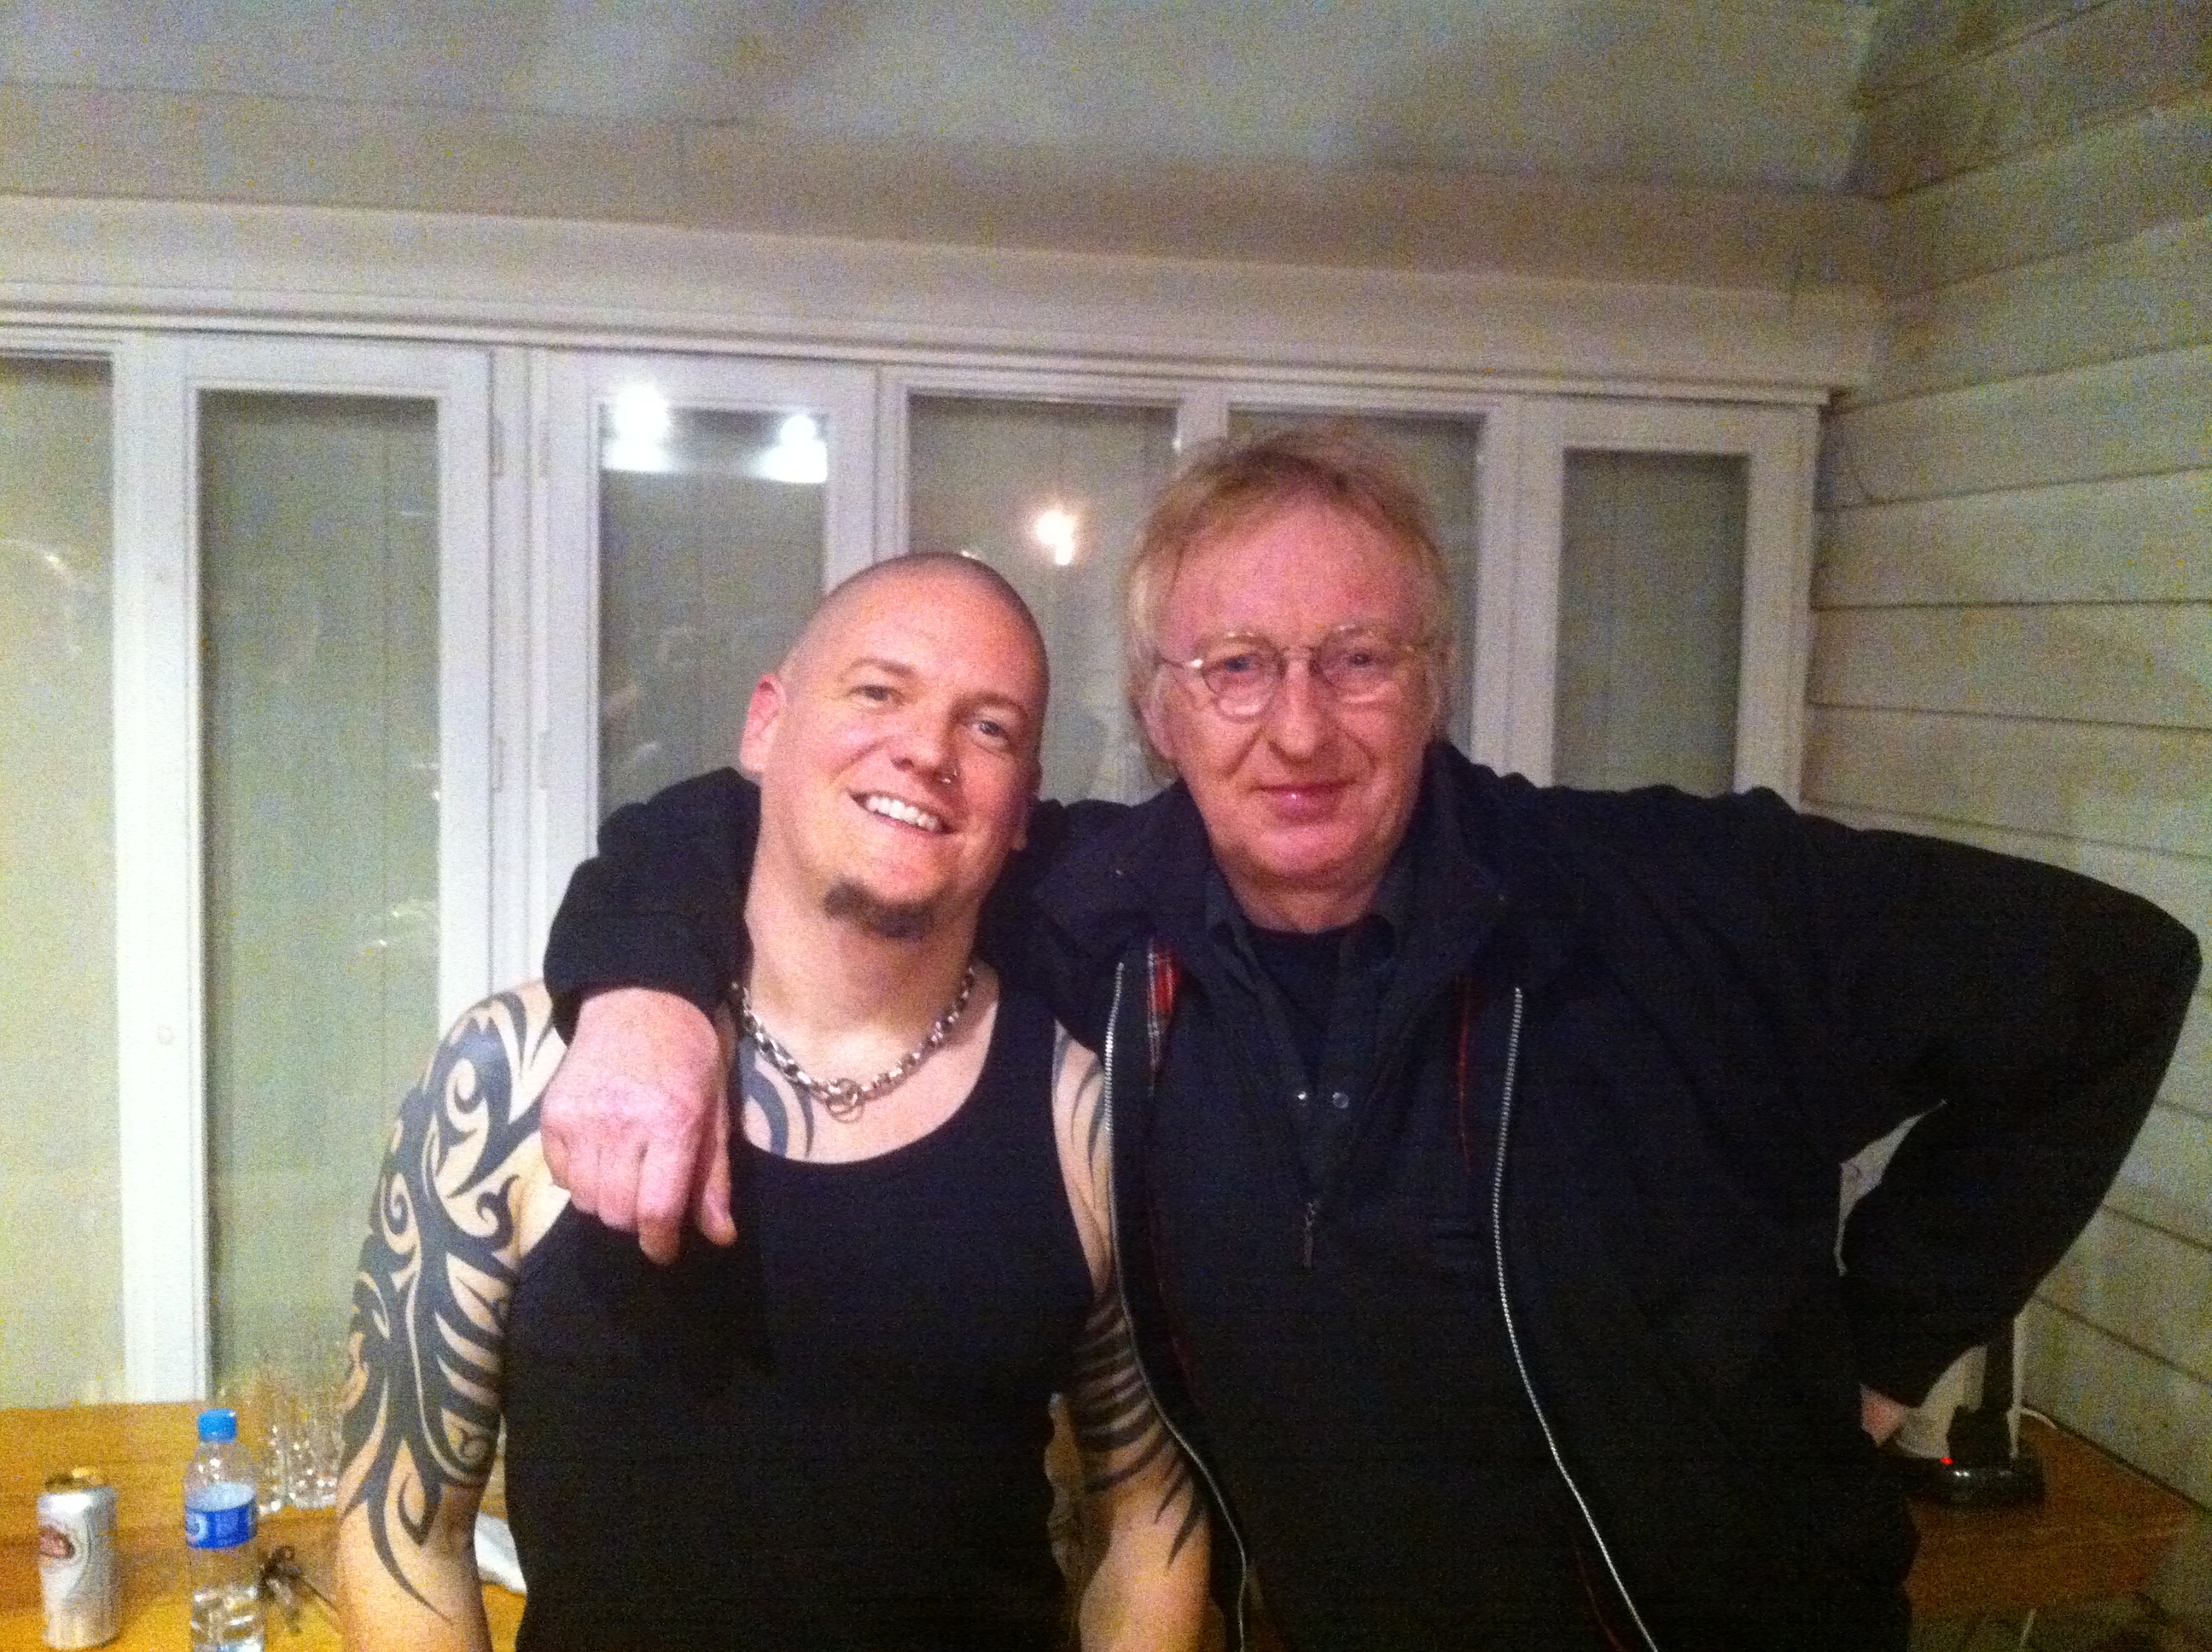 Rat Scabies from show in Margate